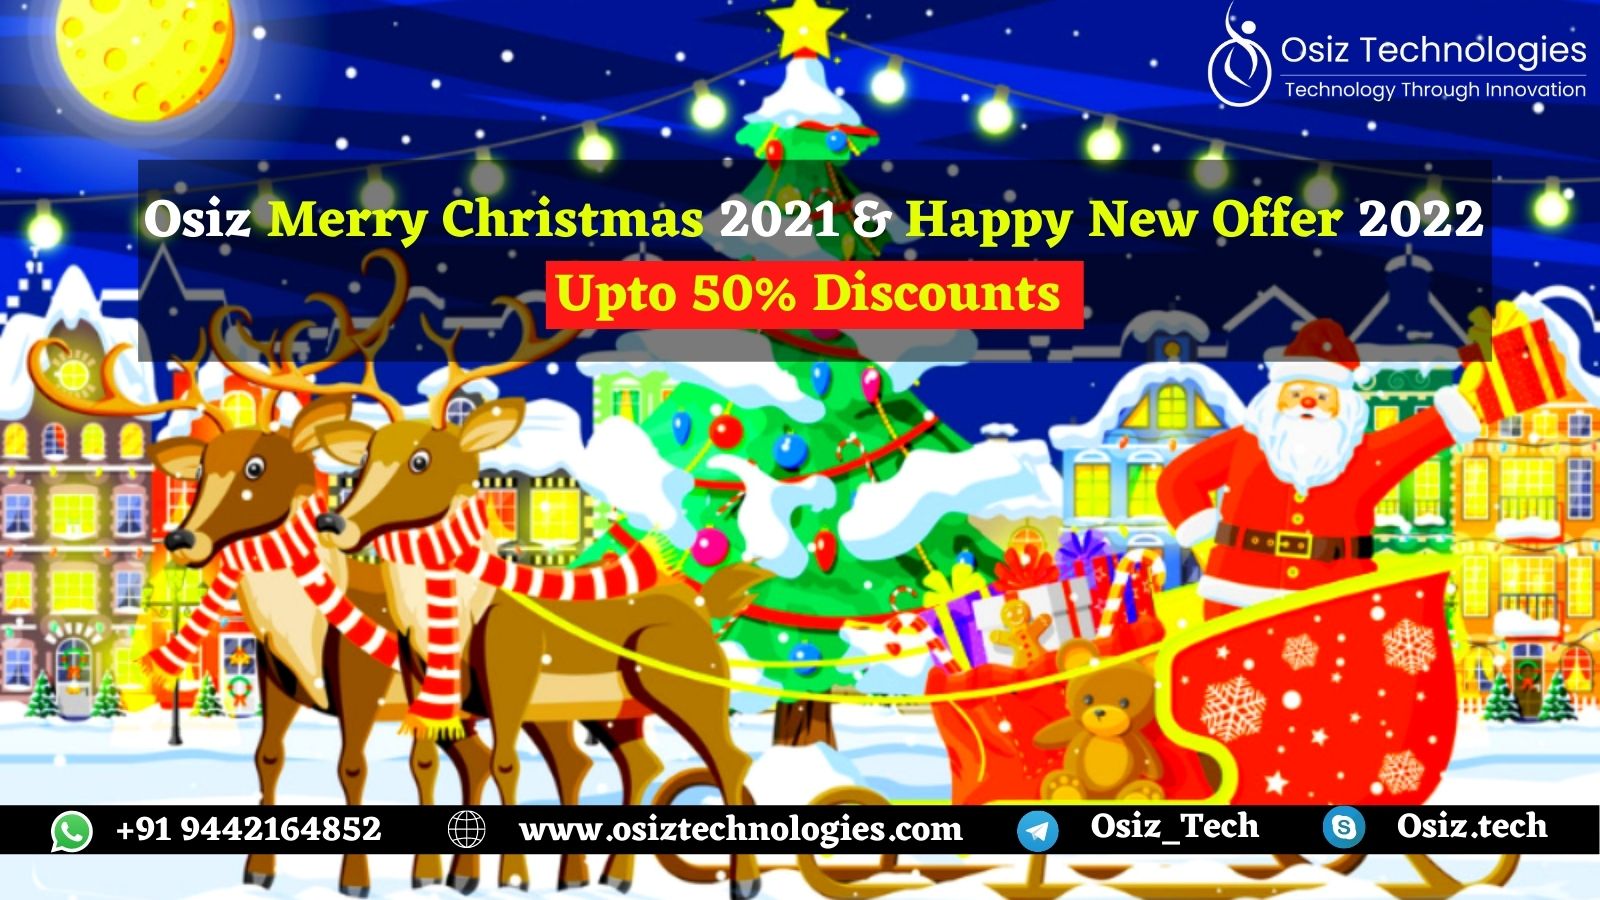 Article about Incredible Christmas 2021 & Happy New Year 2022 Offer! Grab Upto 50% OFF From Us